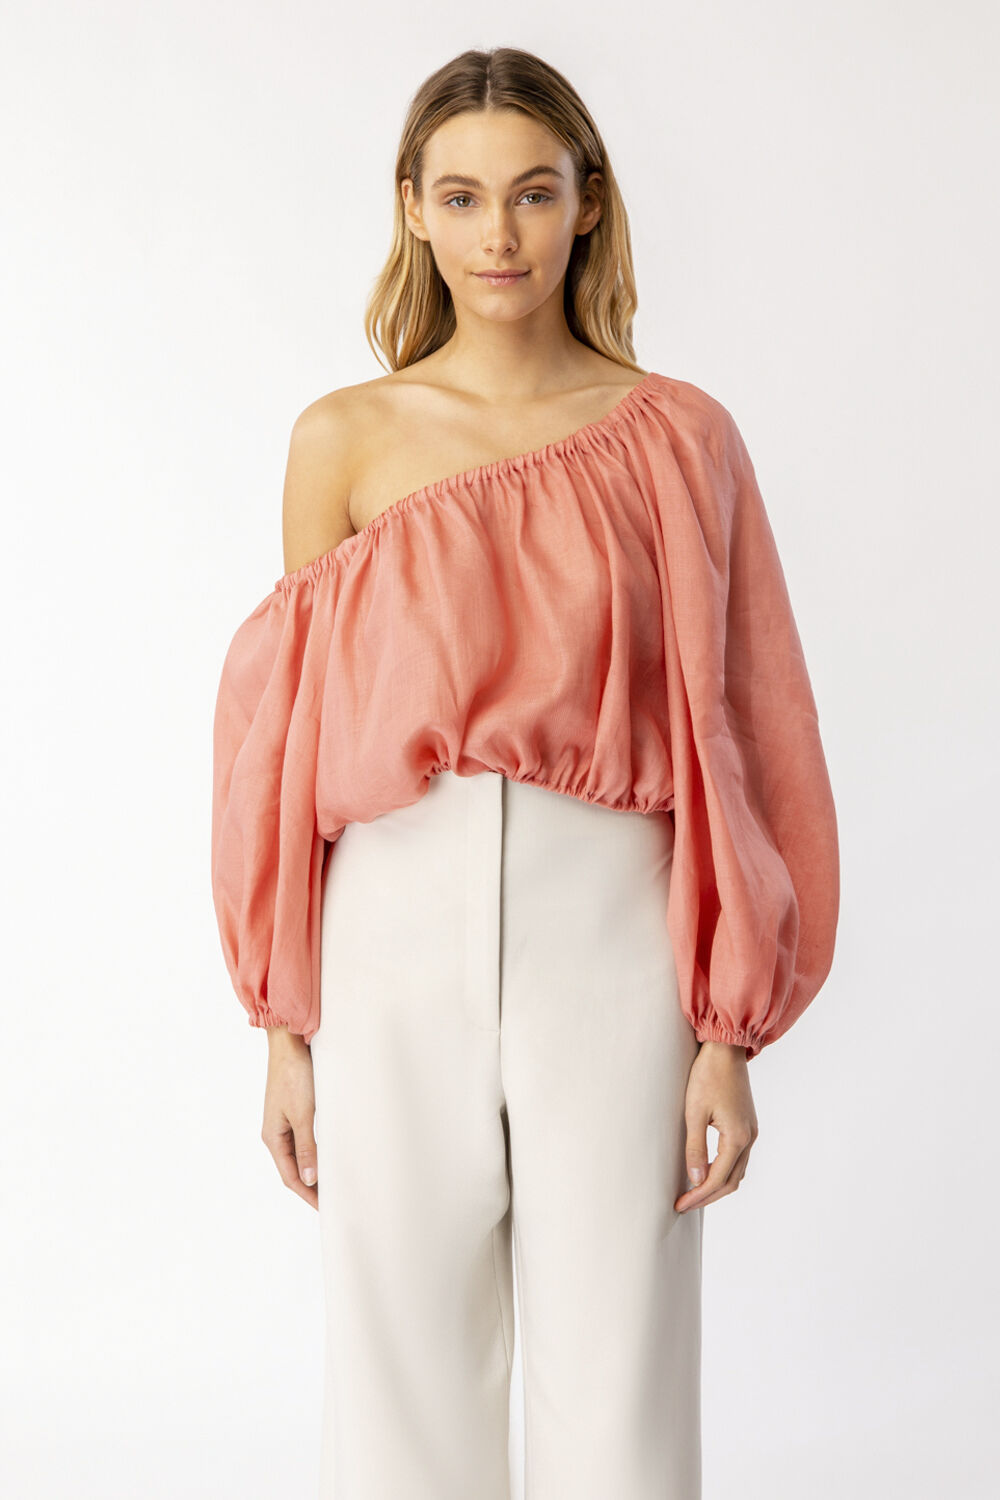 GIANNA ONE SHOULDER TOP in colour CORAL CLOUD